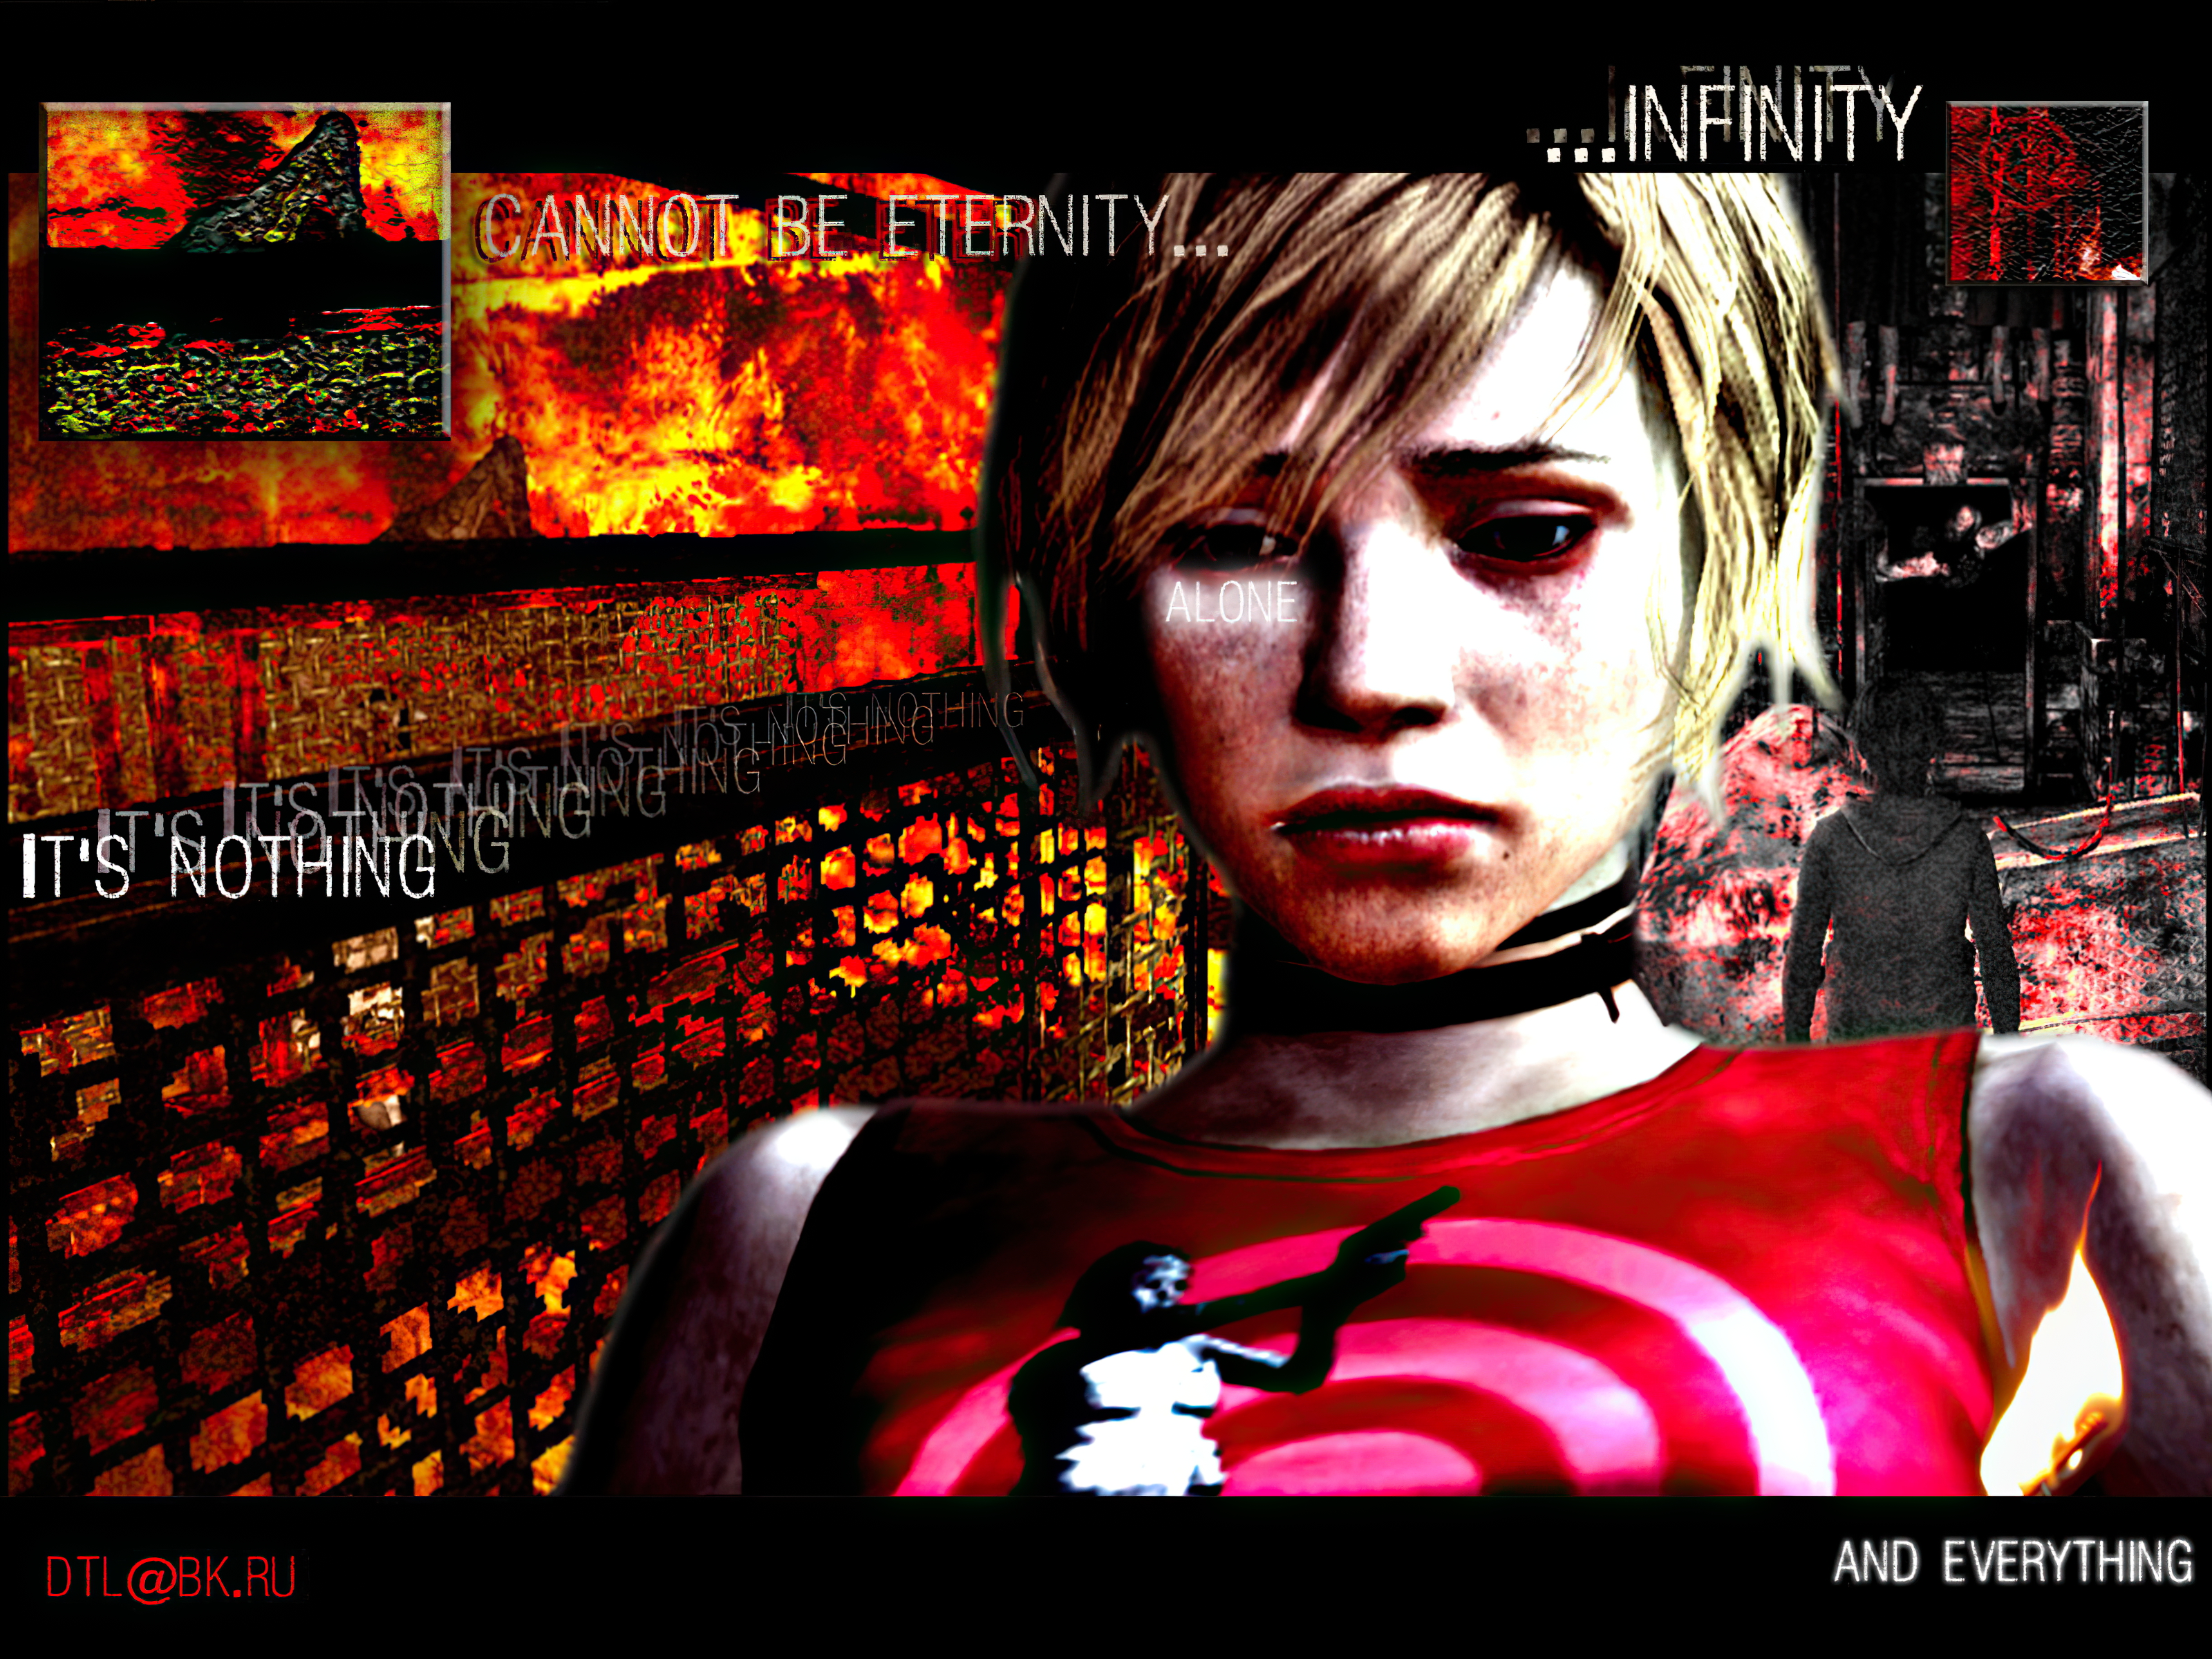 Heather, the iconic character from the video game Silent Hill.